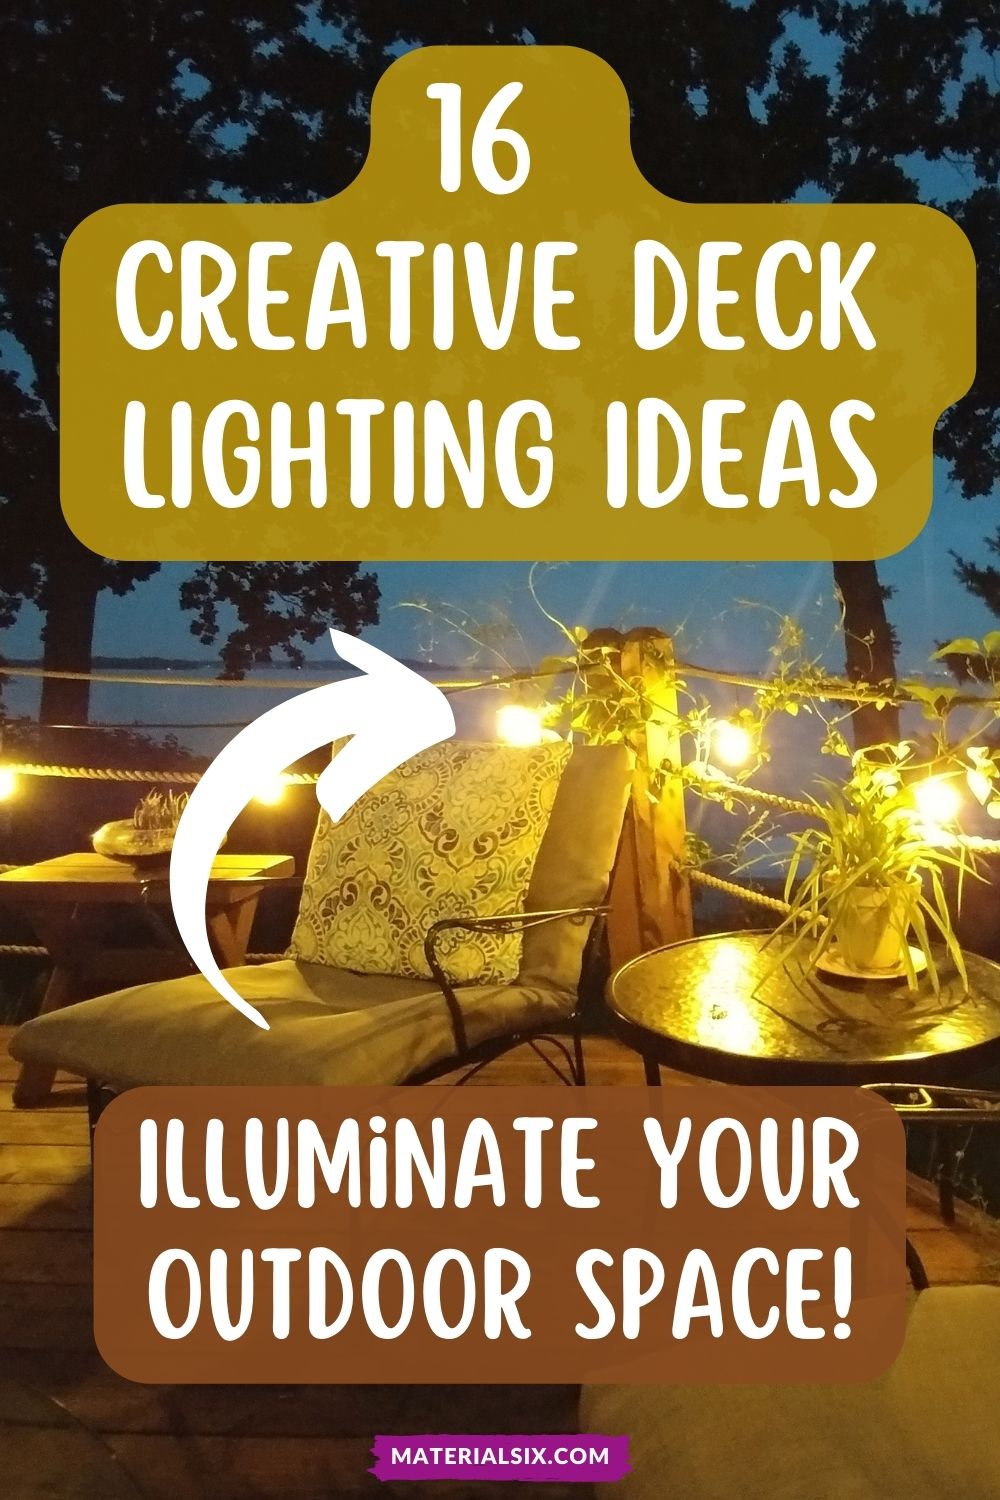 Featured image of a deck showcasing multiple lighting options